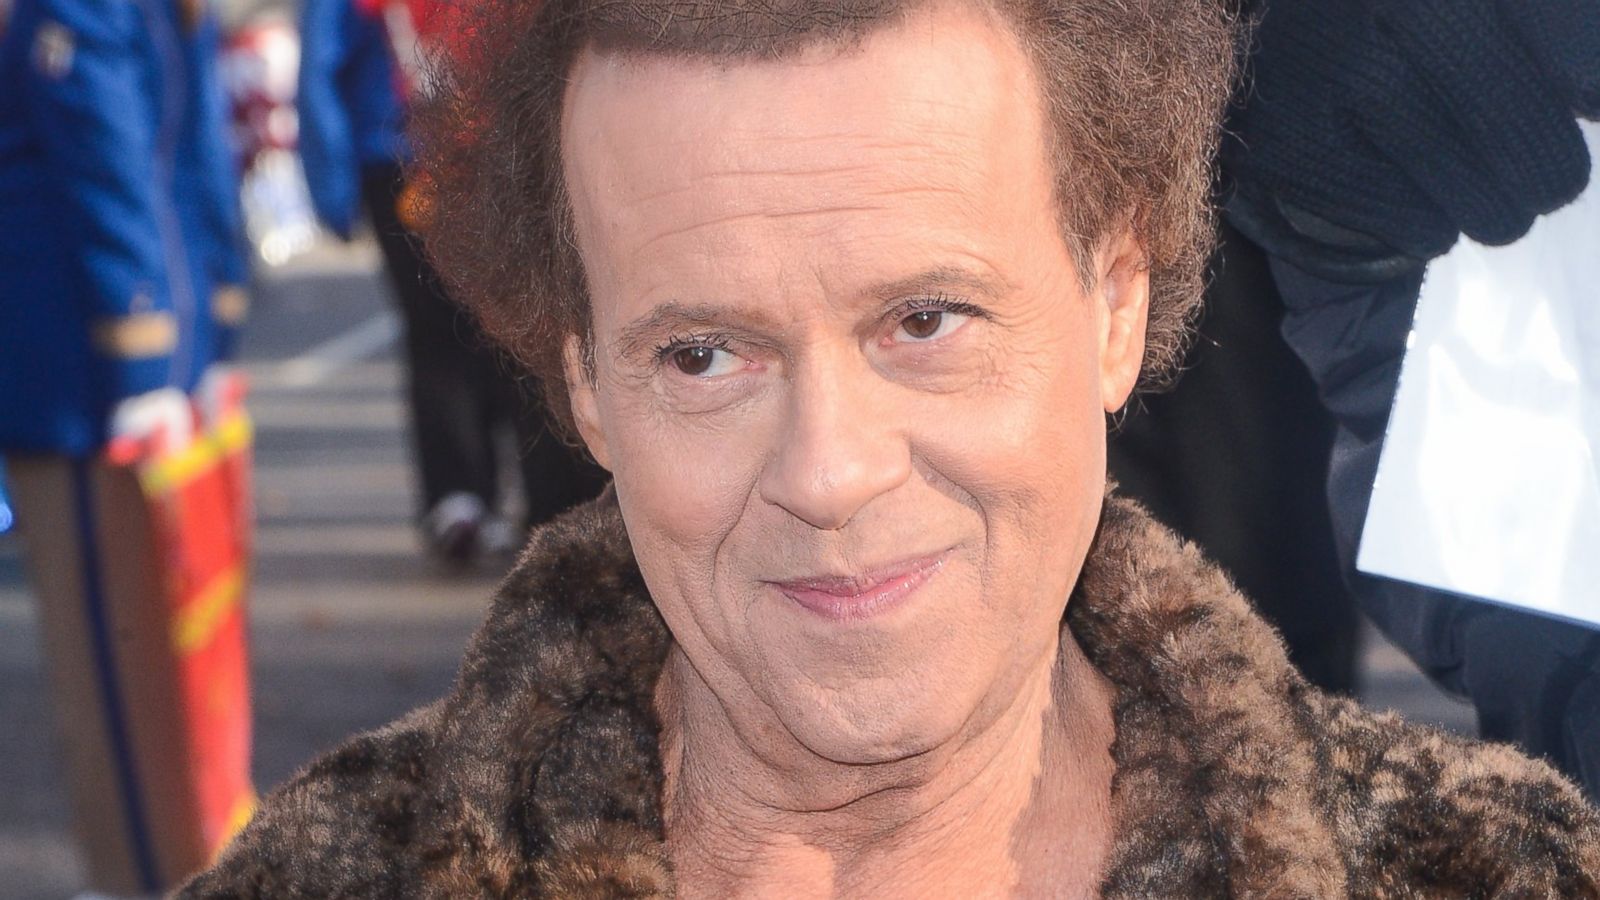 Richard Simmons being still alive